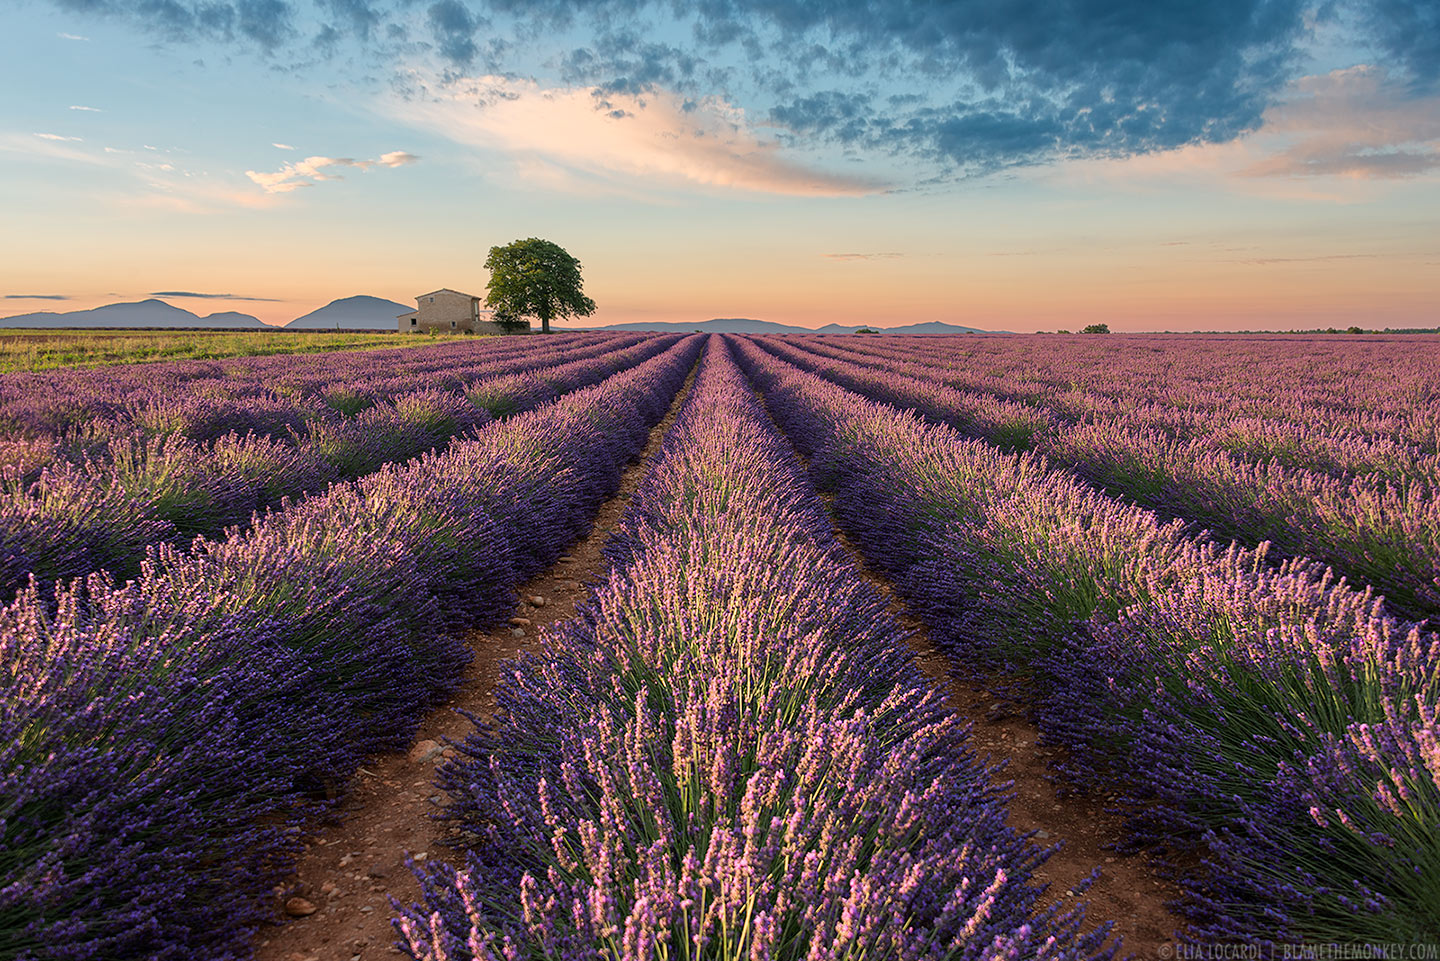 At sunrise, the colors of the lavender fields in Valensole France are absolutely spectacular.